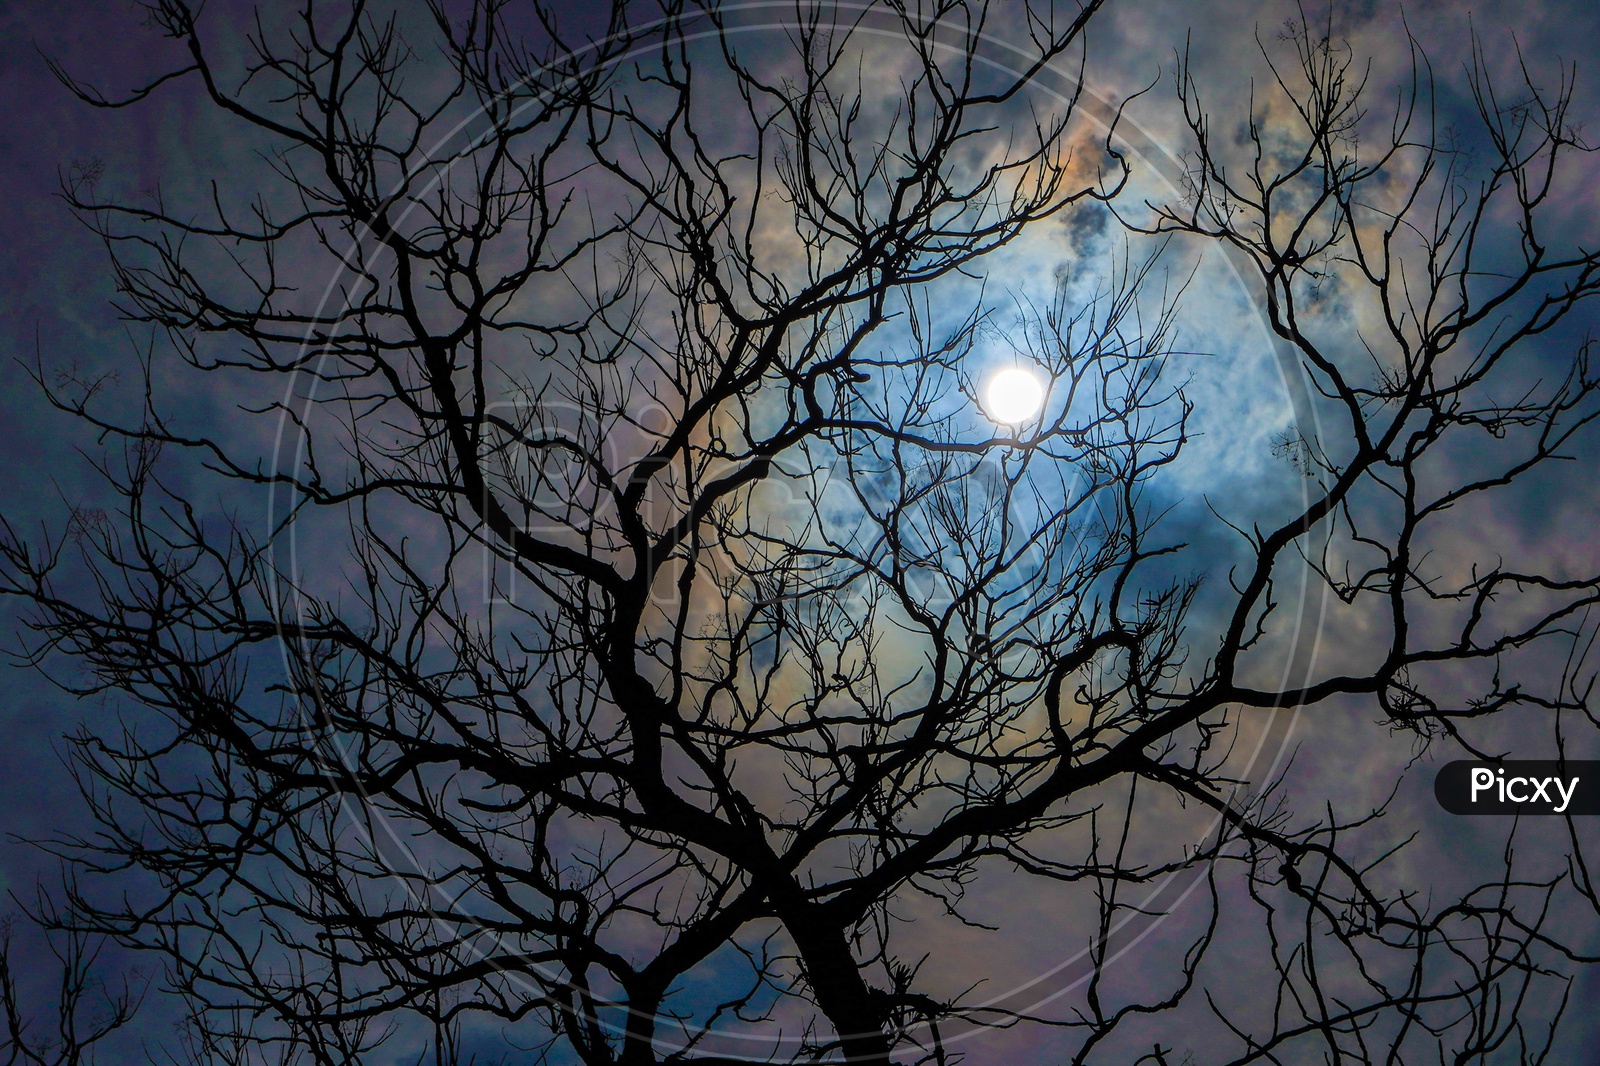 Canopy Of Dried Tree With out Leafs Over A Bright Moon Background